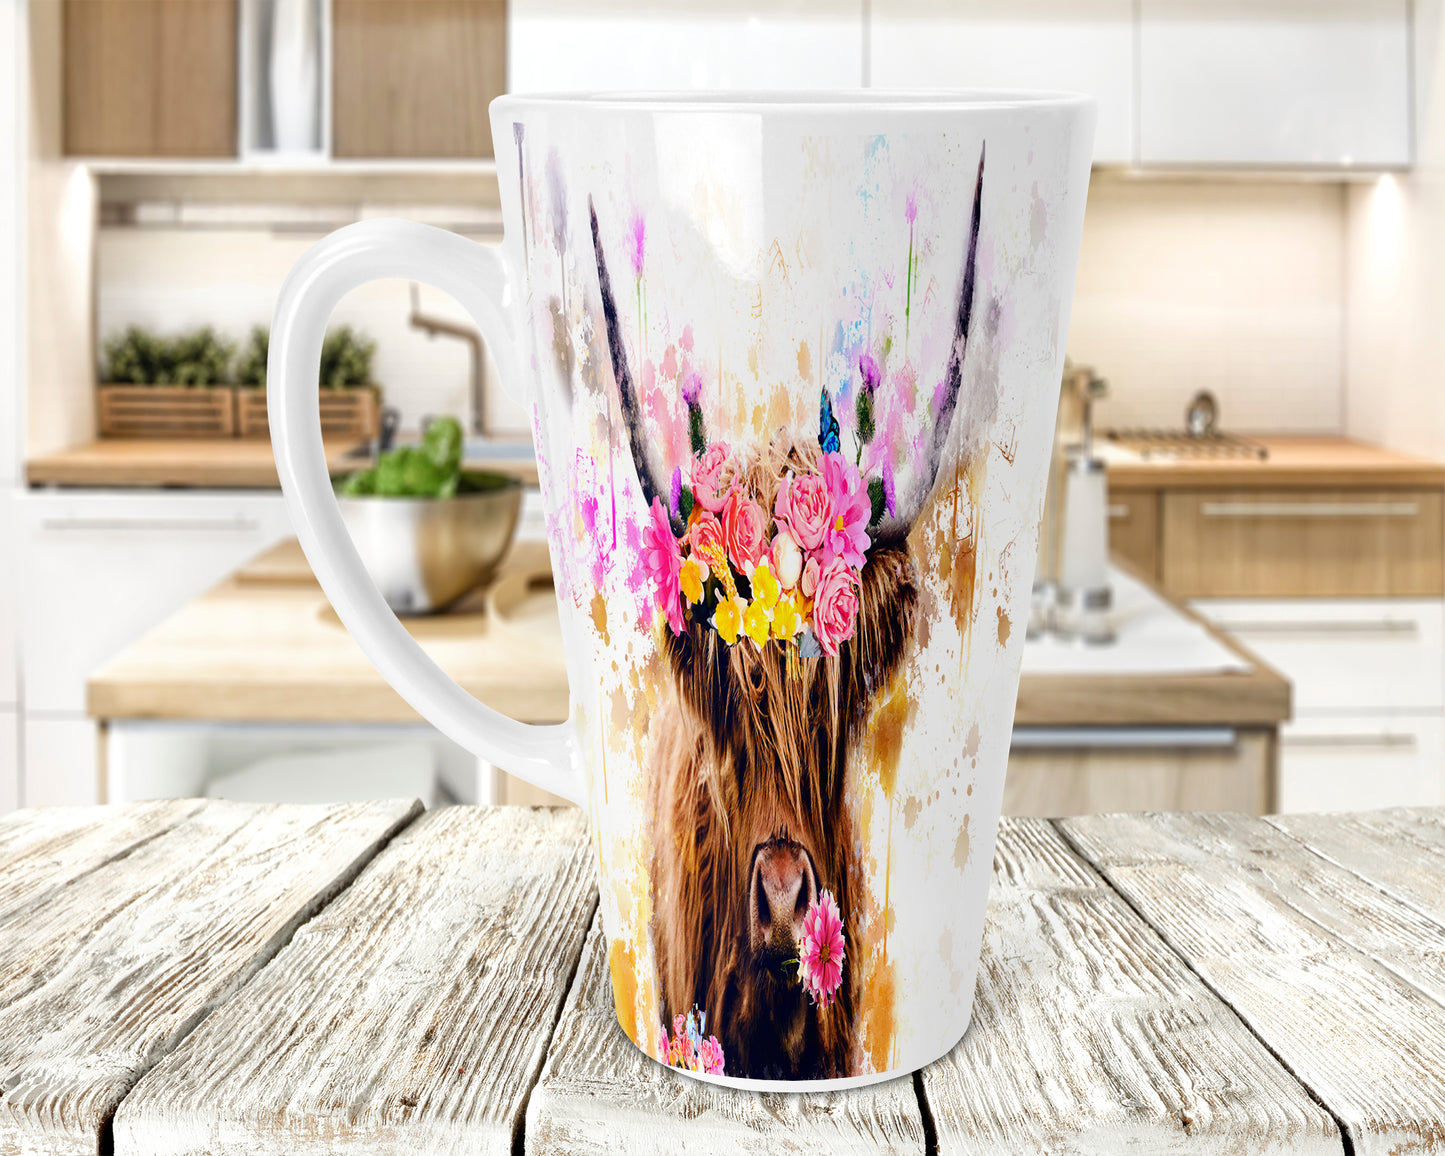 Highland Cow & Flowers 17oz Skinny Latte Coffee Mug, Highland Cow Latte Mug, Scottish Latte Mug, Highland Cows, Scottish Gift, Made In Scotland